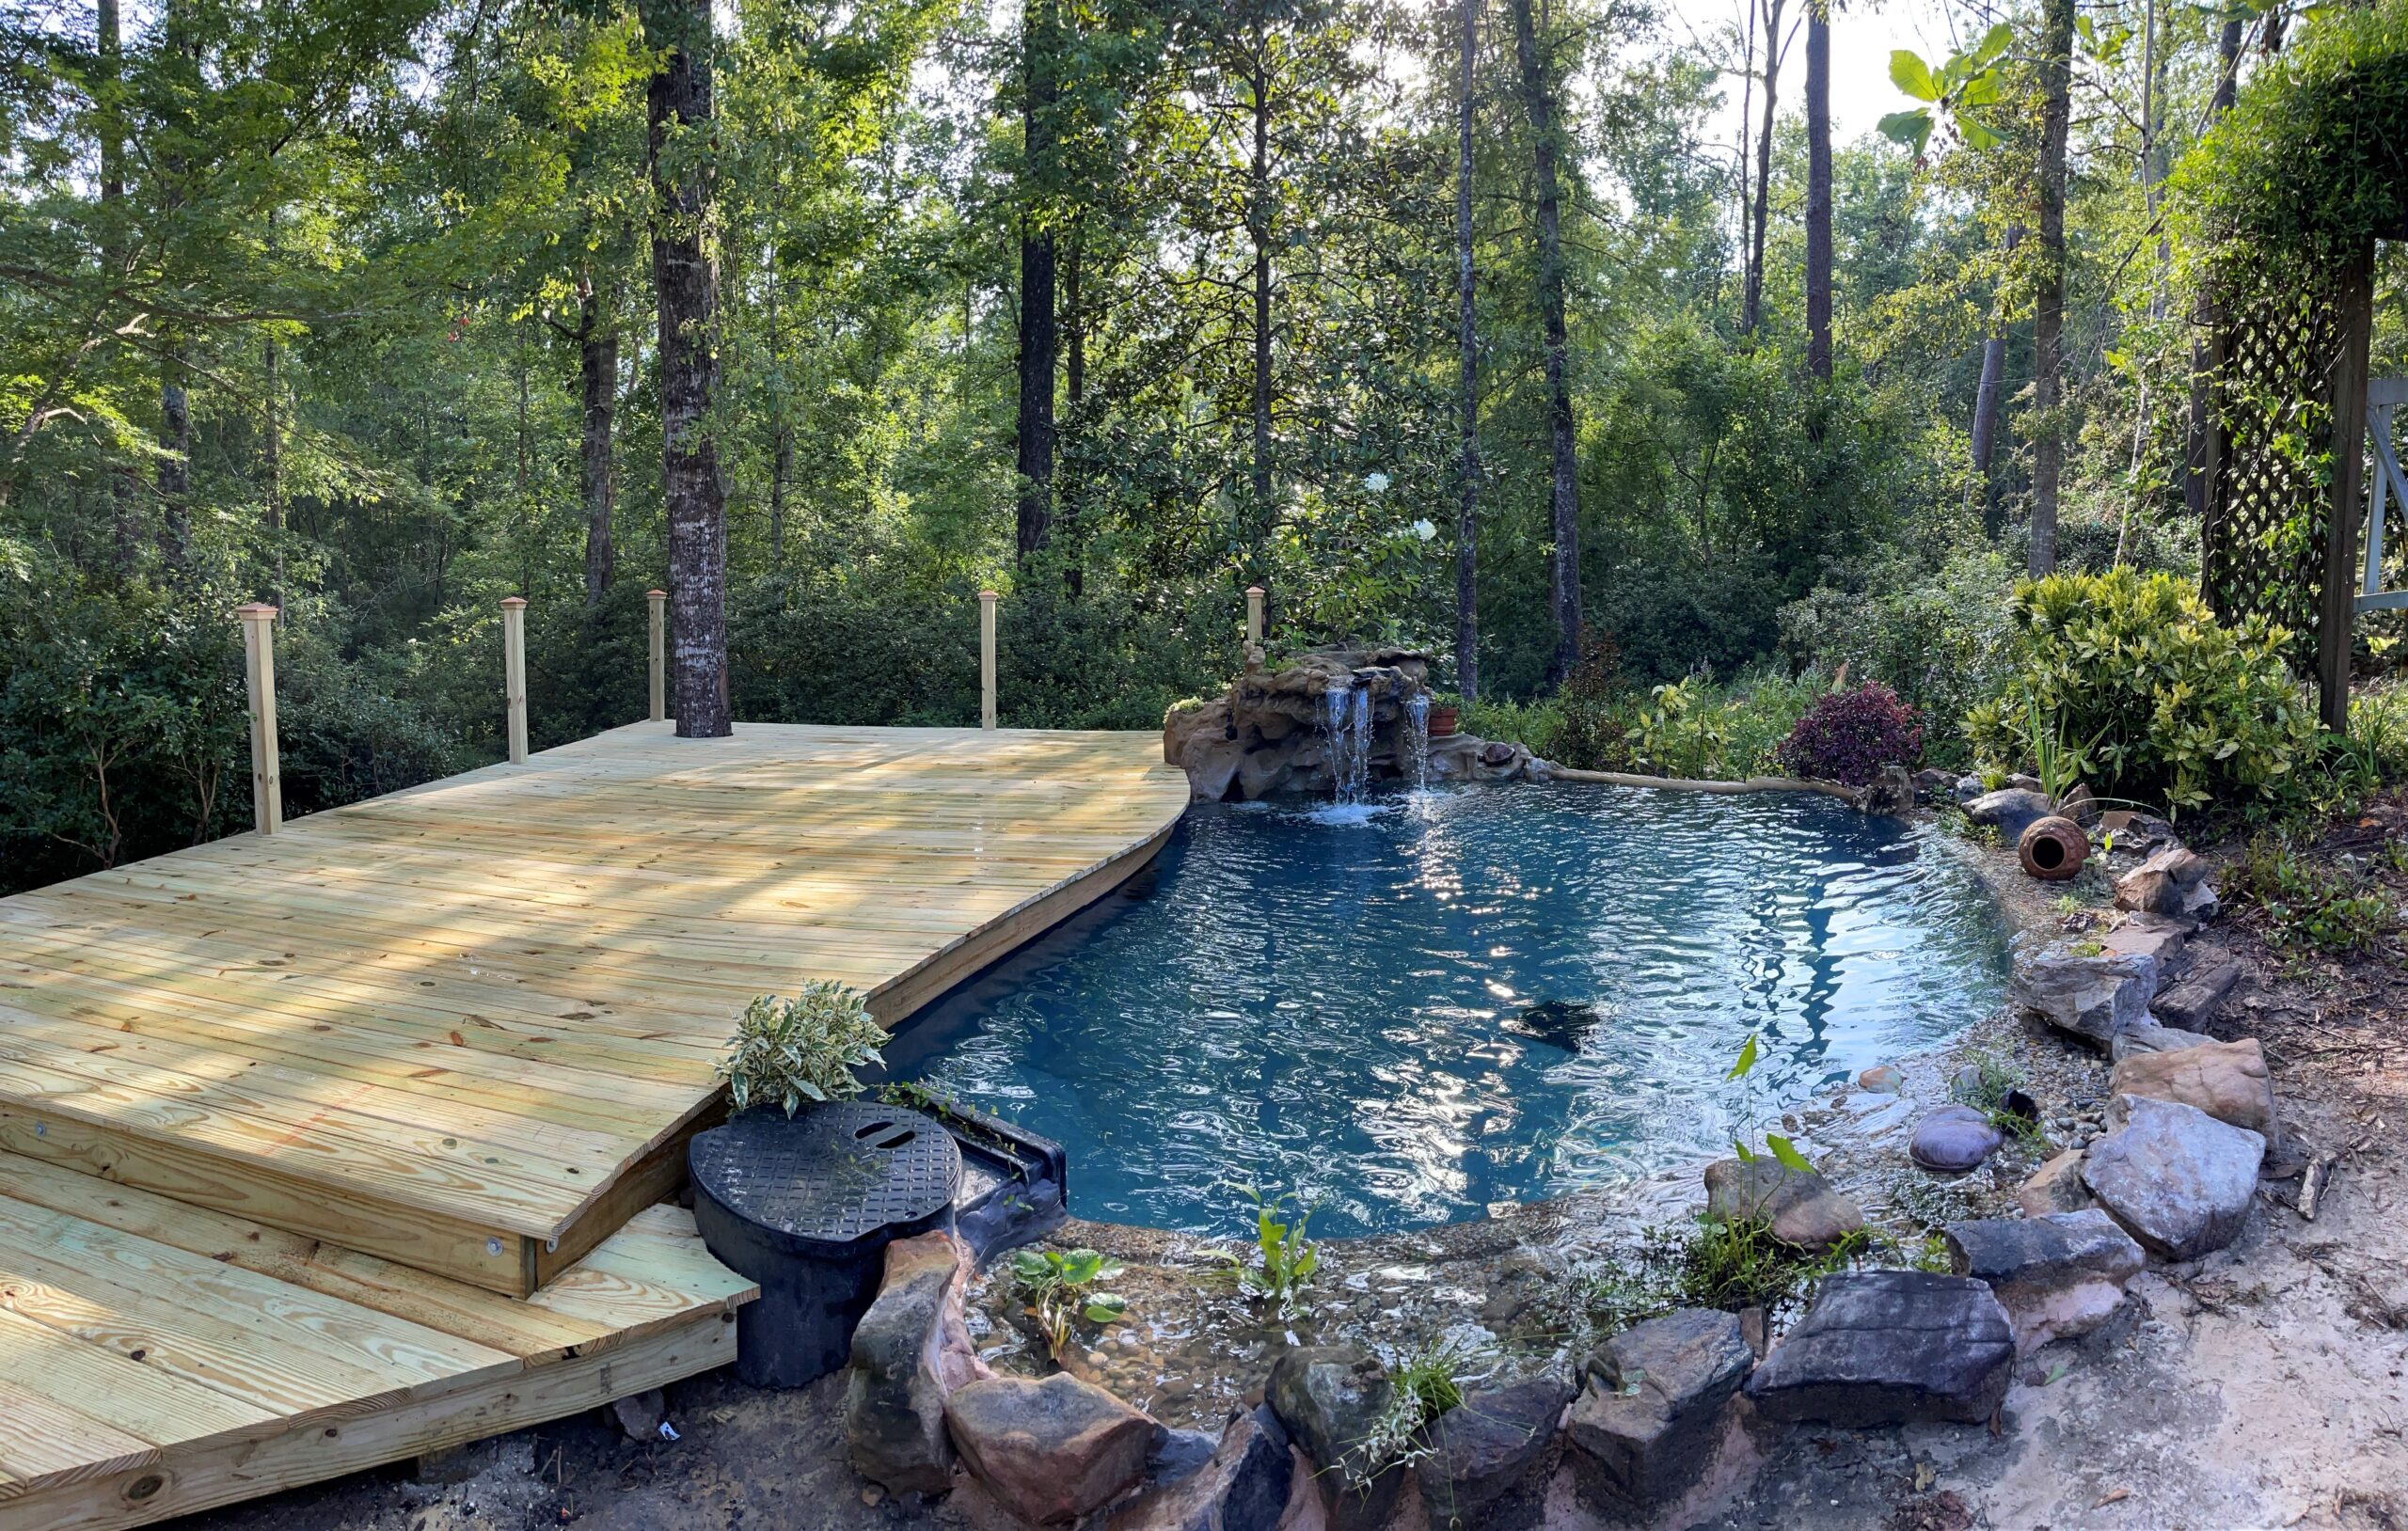 A pool with a wooden deck and waterfall.